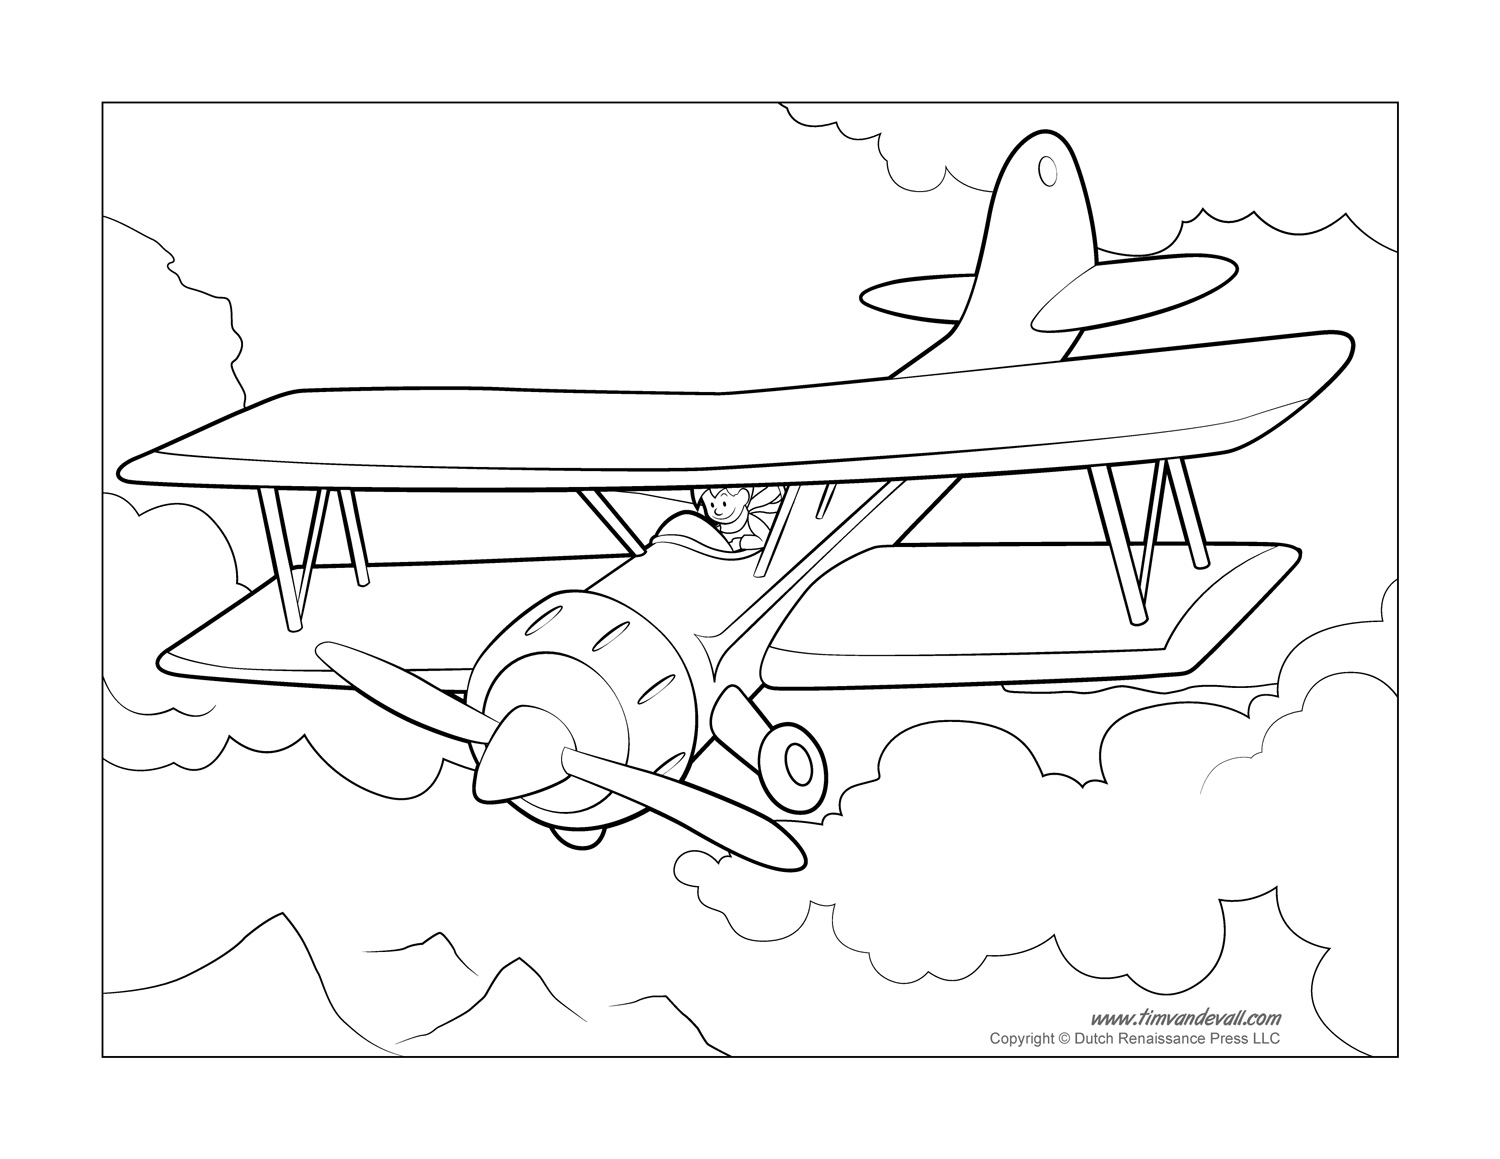 draco airplane coloring page